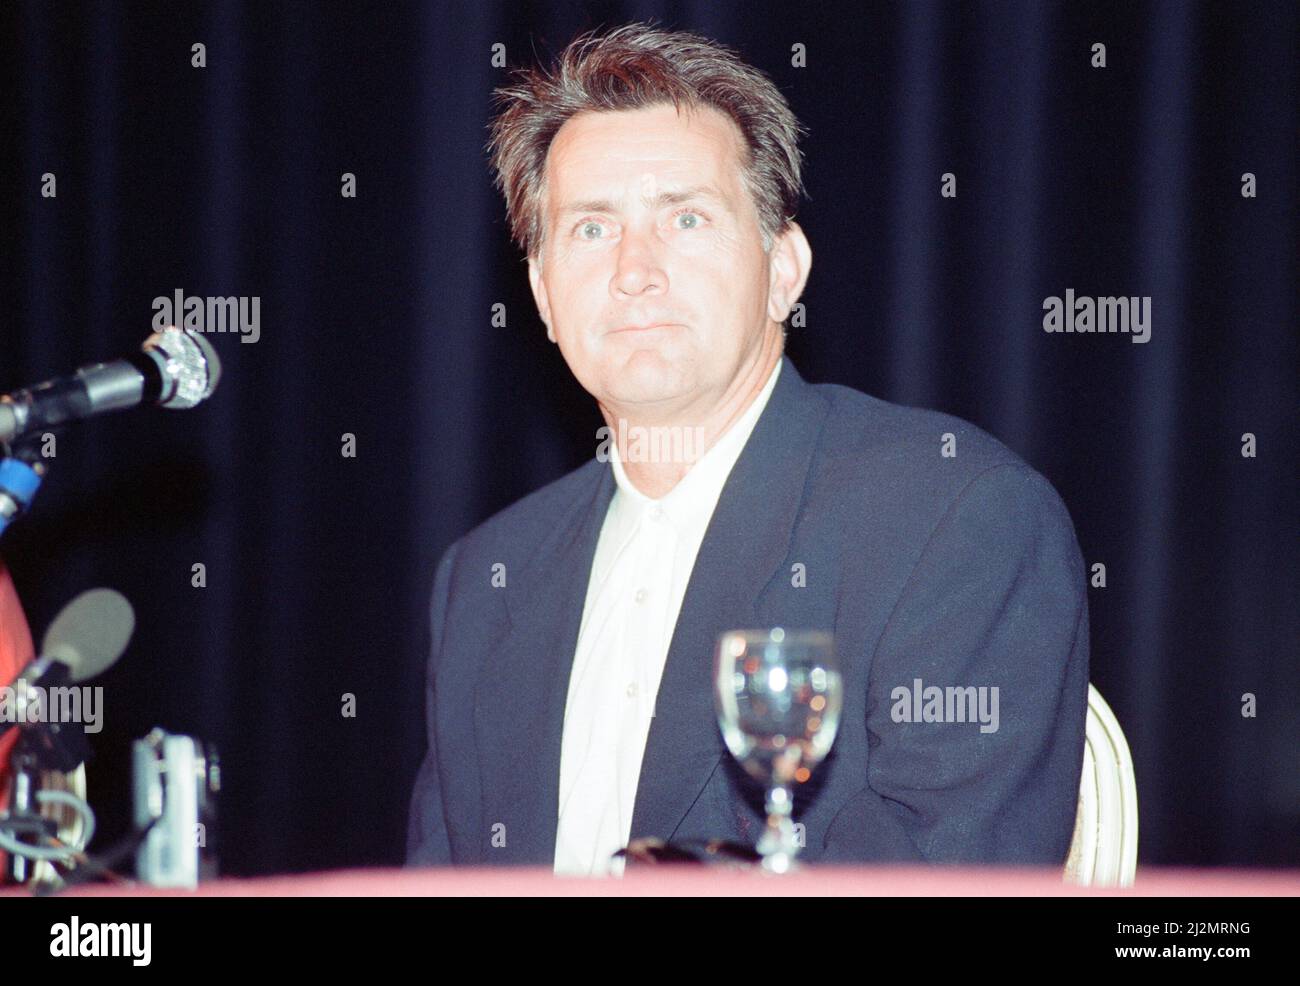 Deauville American Film Festival, Deauville, France, September 1990.  Our picture shows ... Martin Sheen at the festival to promote new film, Cadence, which he both directs and stars in as the character Major Sgt. Otis V. McKinney. Stock Photo